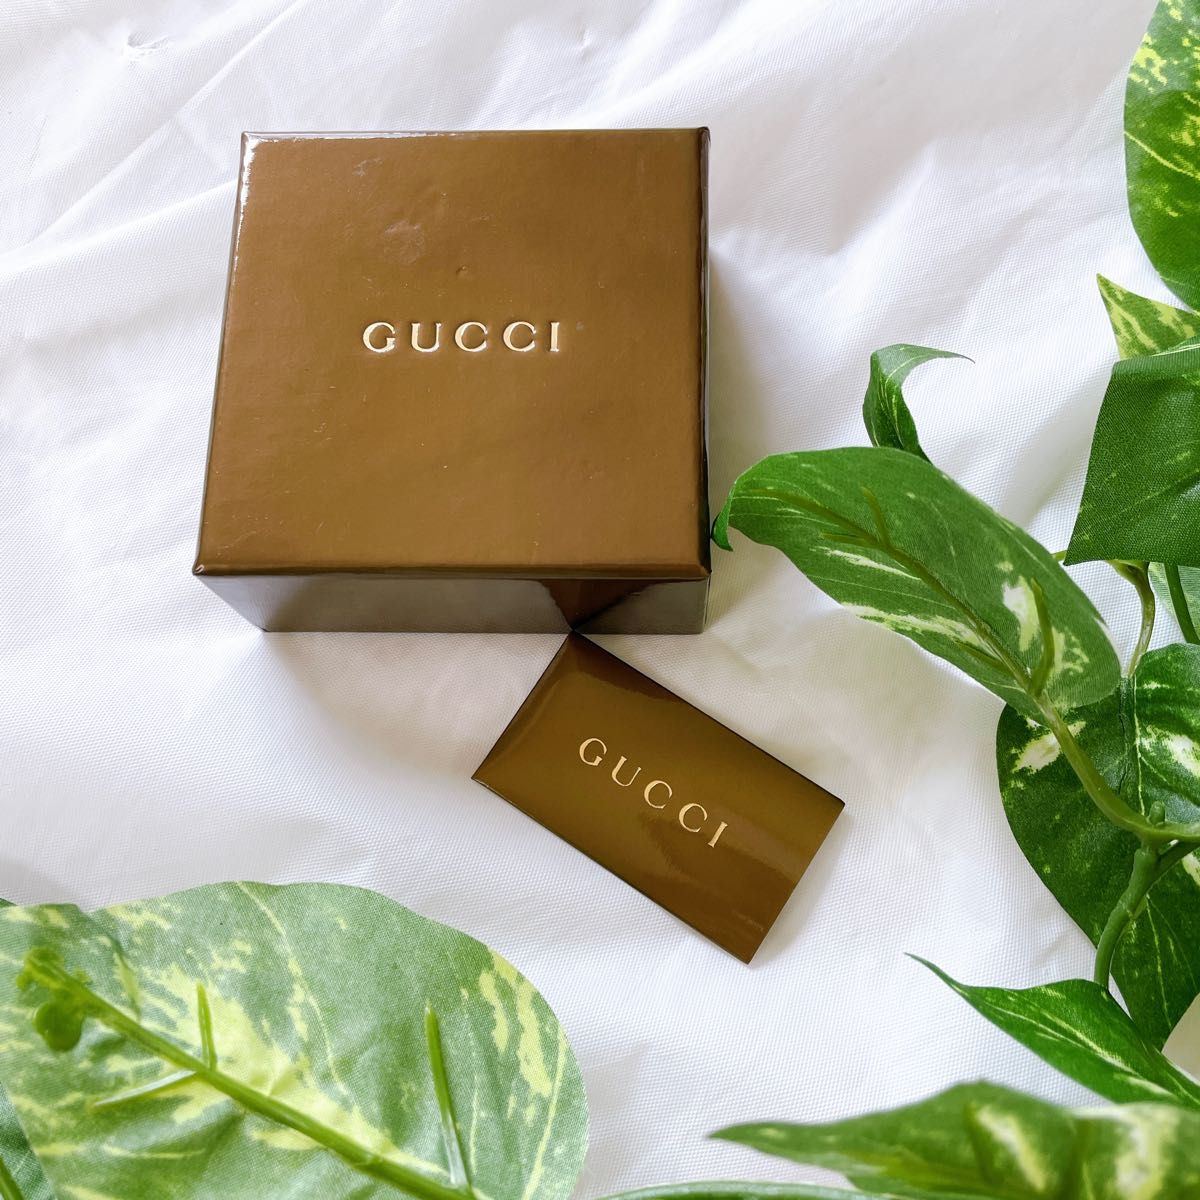 GUCCI 空箱 グッチ - ラッピング・包装